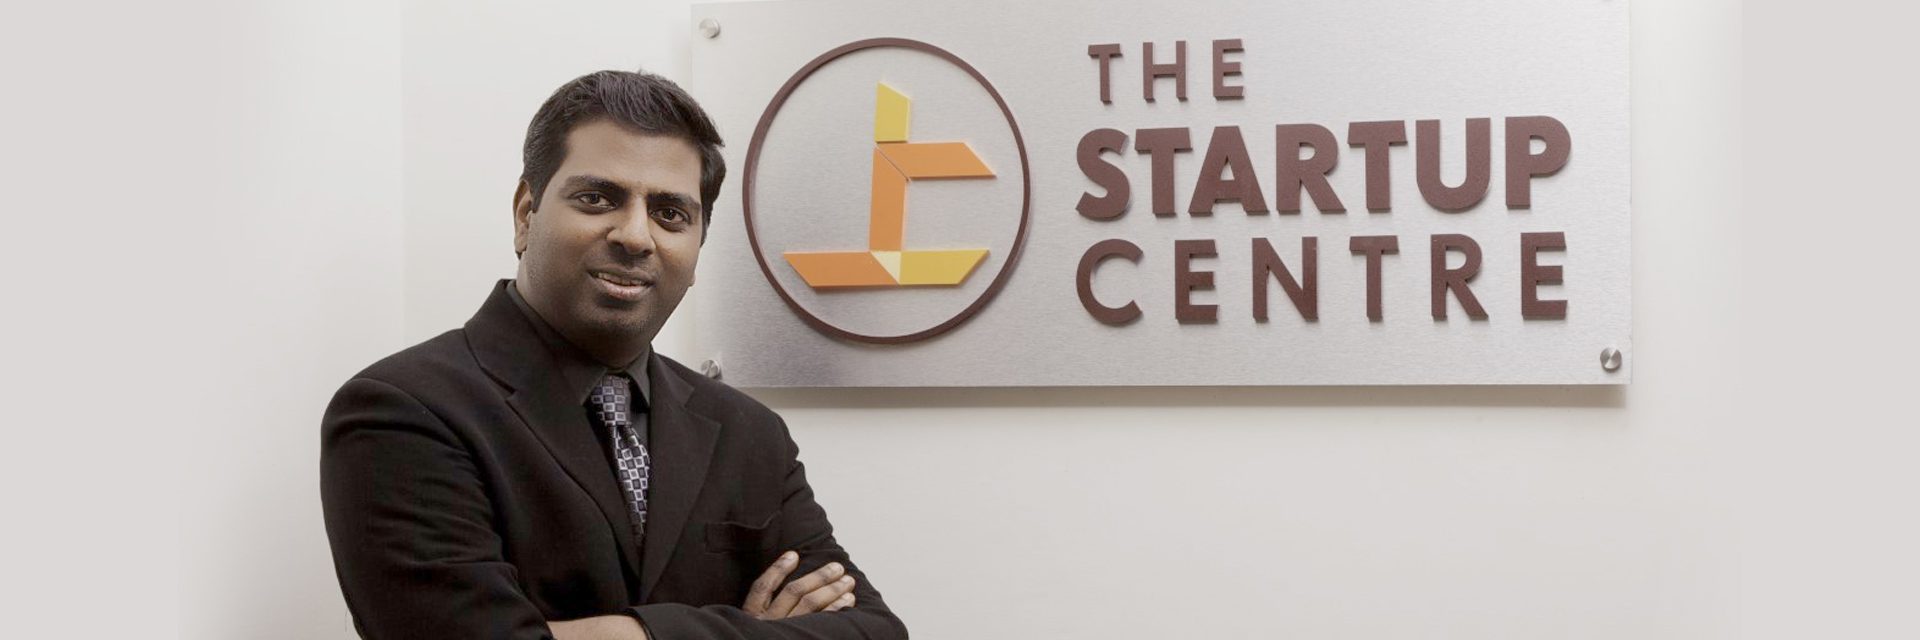 The Startup Guy | Vijay Anand | The Startup Centre | IIT-M RTBI